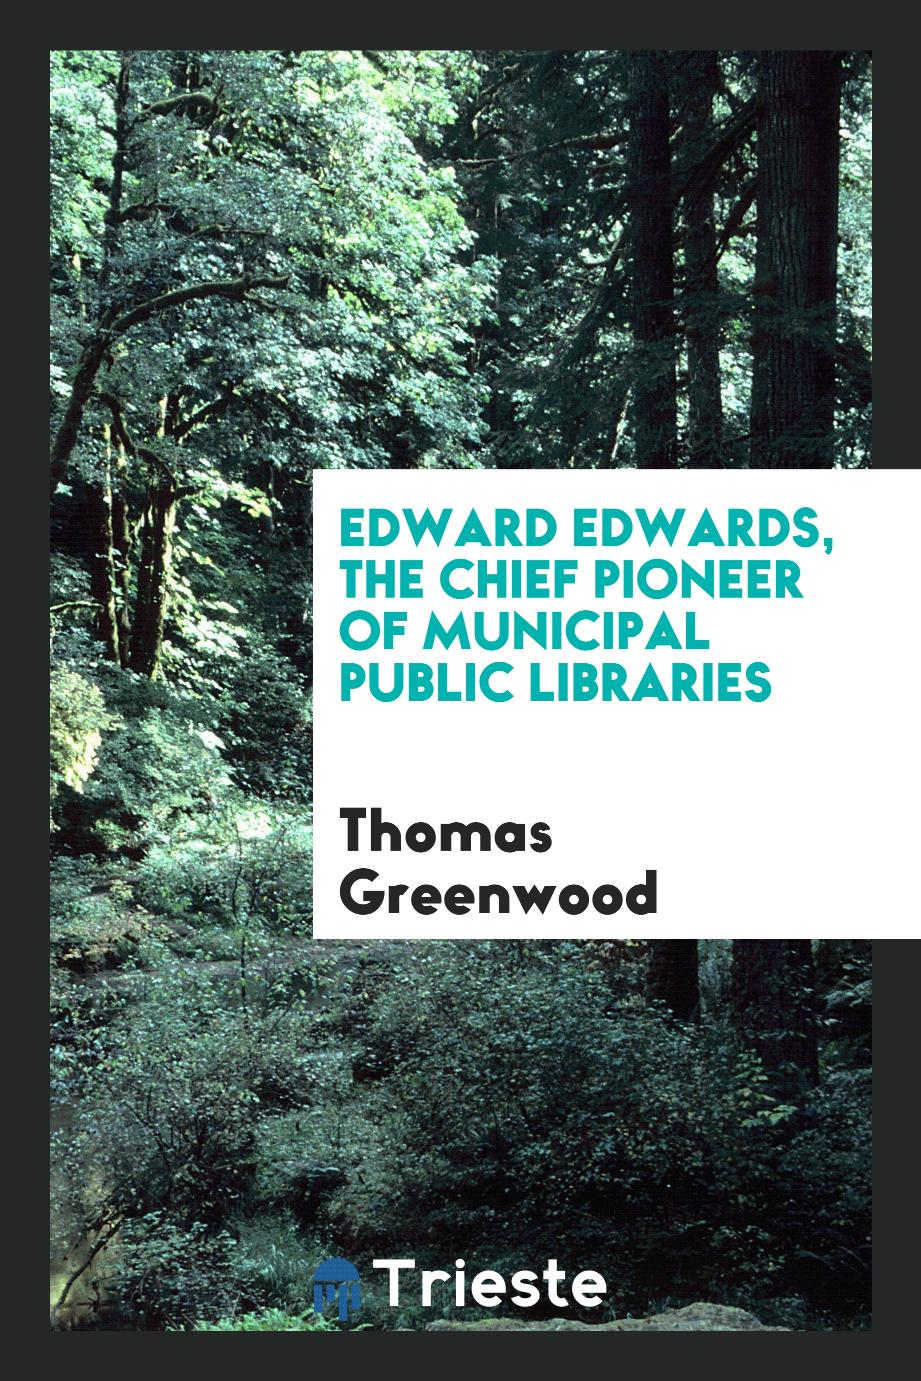 Edward Edwards, the chief pioneer of municipal public libraries